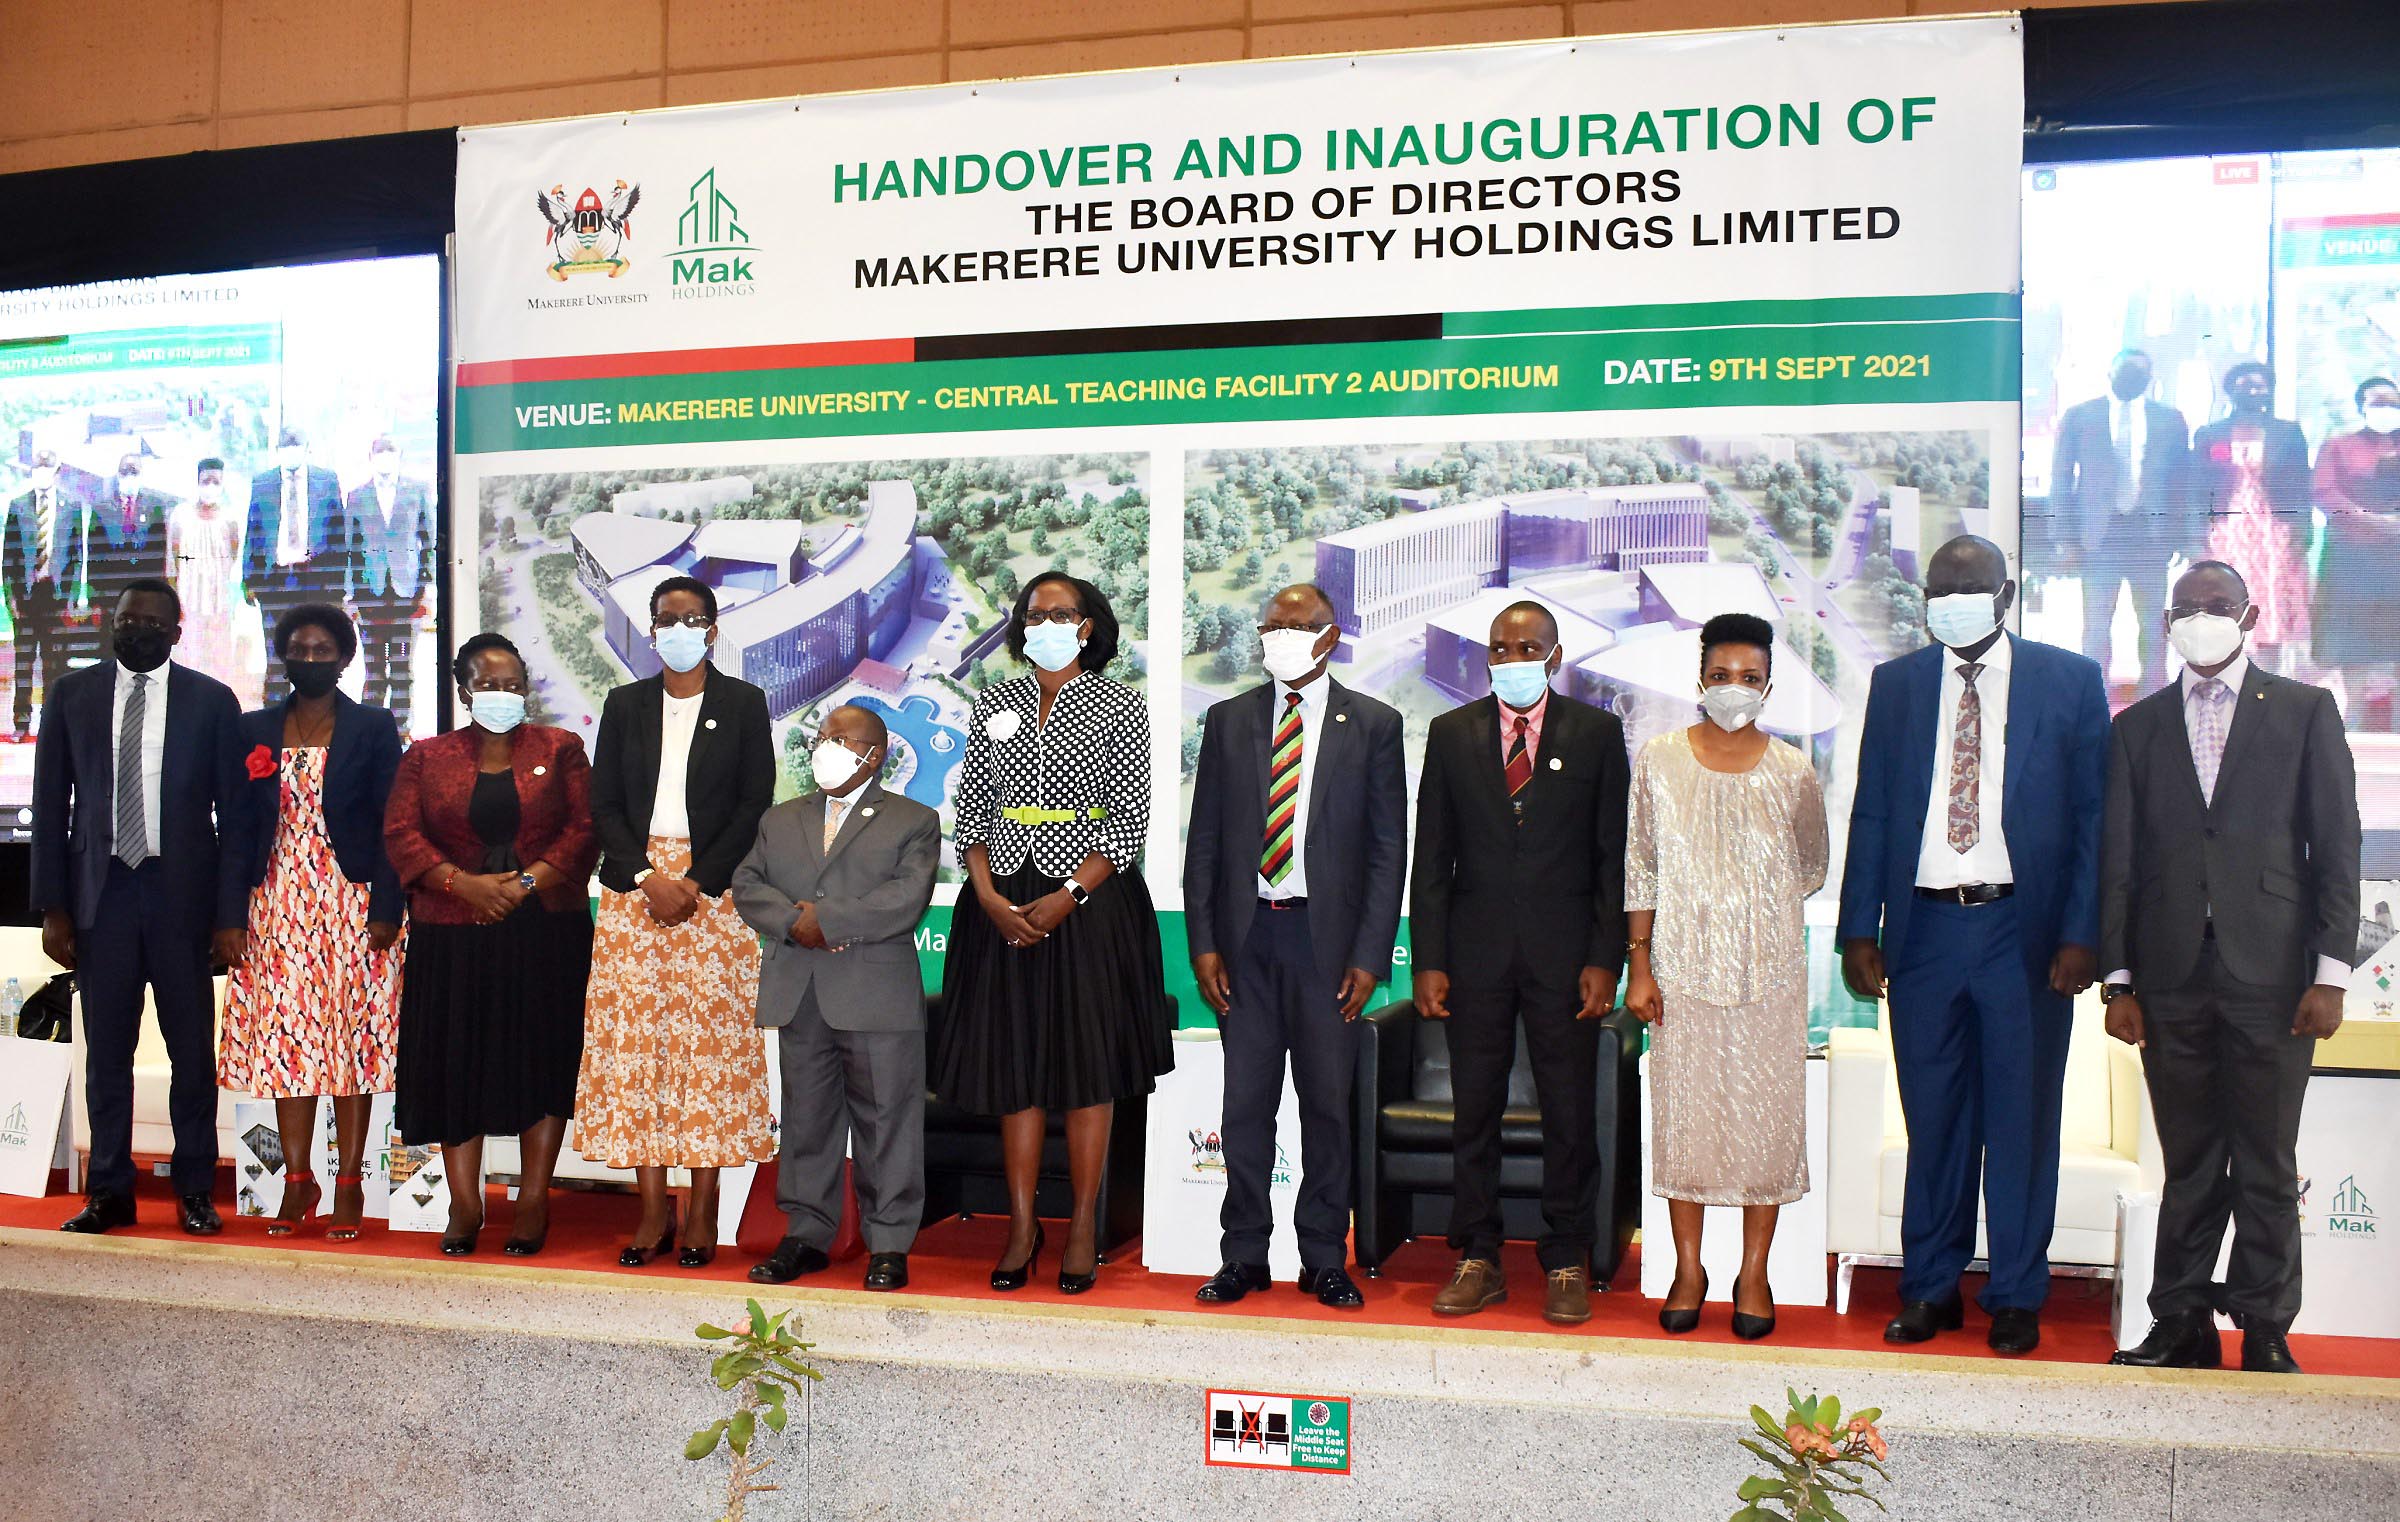 Council Chairperson-Mrs. Lorna Magara (C), Vice Chancellor, Prof. Barnabas Nawangwe (5th R), DVCAA Dr. Umar Kakumba (R), Ag. DVCFA Prof. Josephine Nabukenya,(2nd L) and US-Mr. Yusuf Kiranda (L) pose for a photo with the Chairperson-Mr. Christopher K. Musoke (5th L) and members of the New Board of Mak Holdings Ltd after inauguration at CTF2 on 9th September 2021.